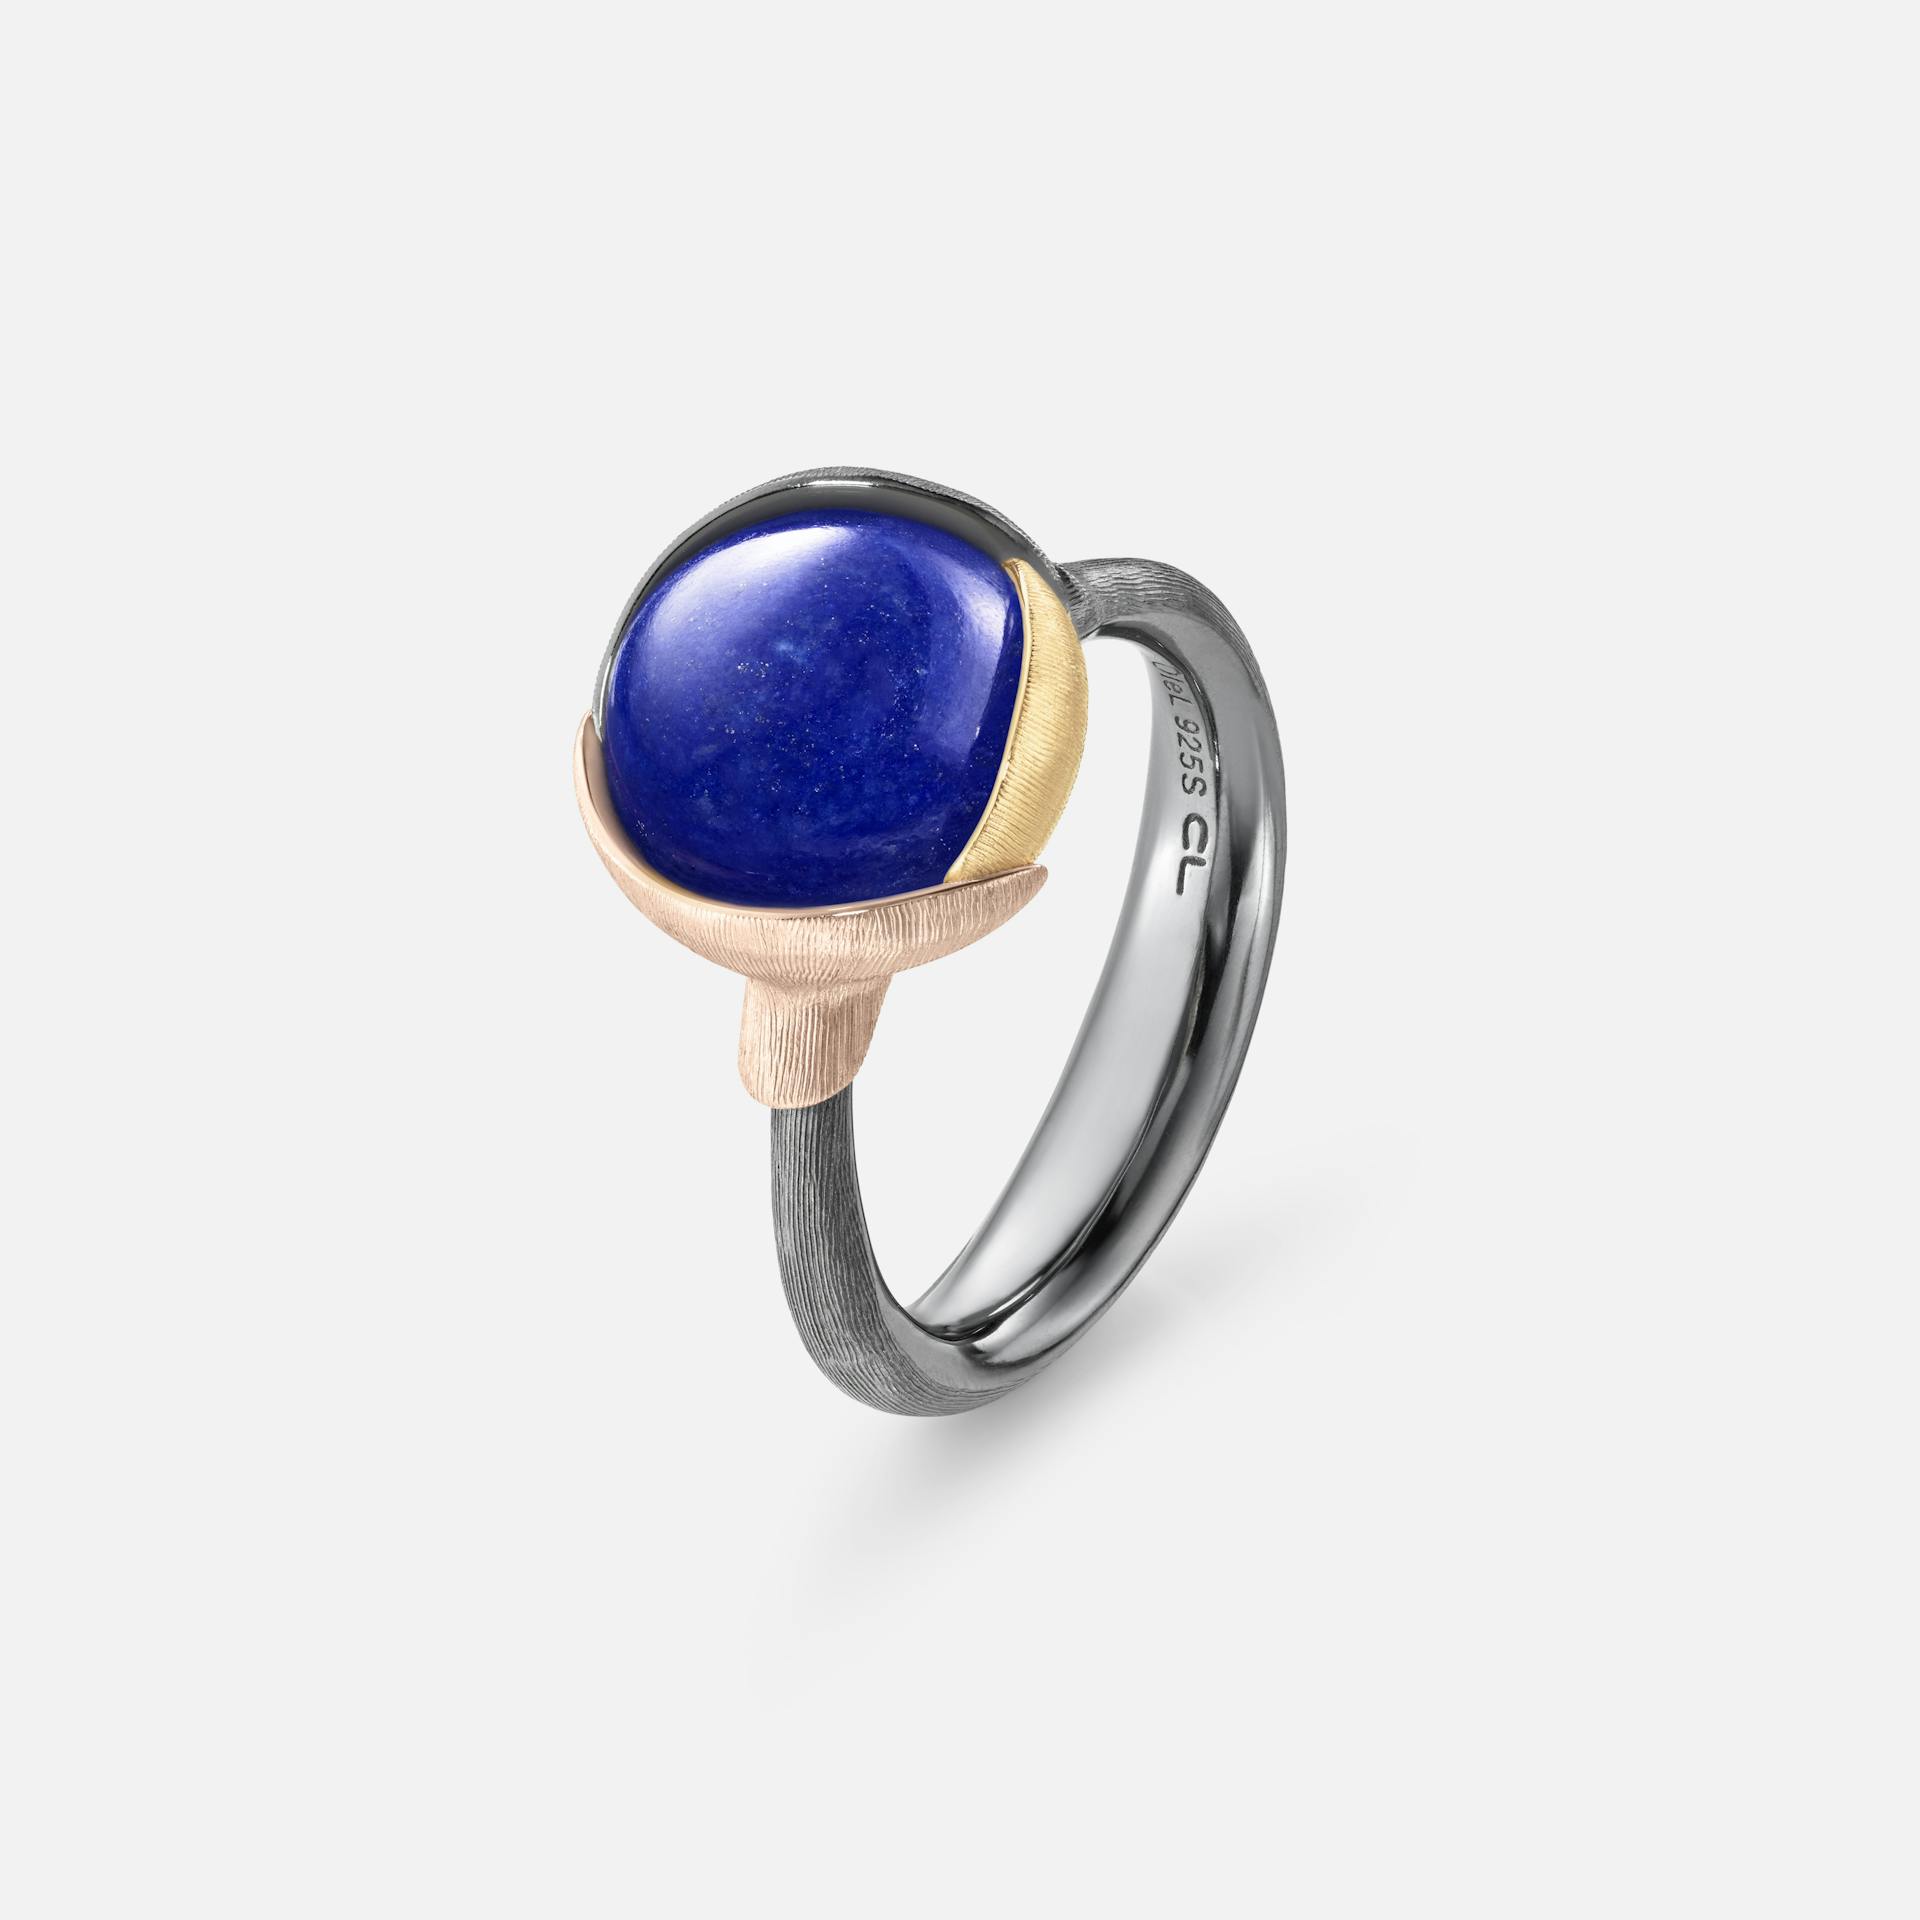 Lotus Ring size 2 in Gold & Oxidized Sterling Silver with Lapis Lazuli  |  Ole Lynggaard Copenhagen